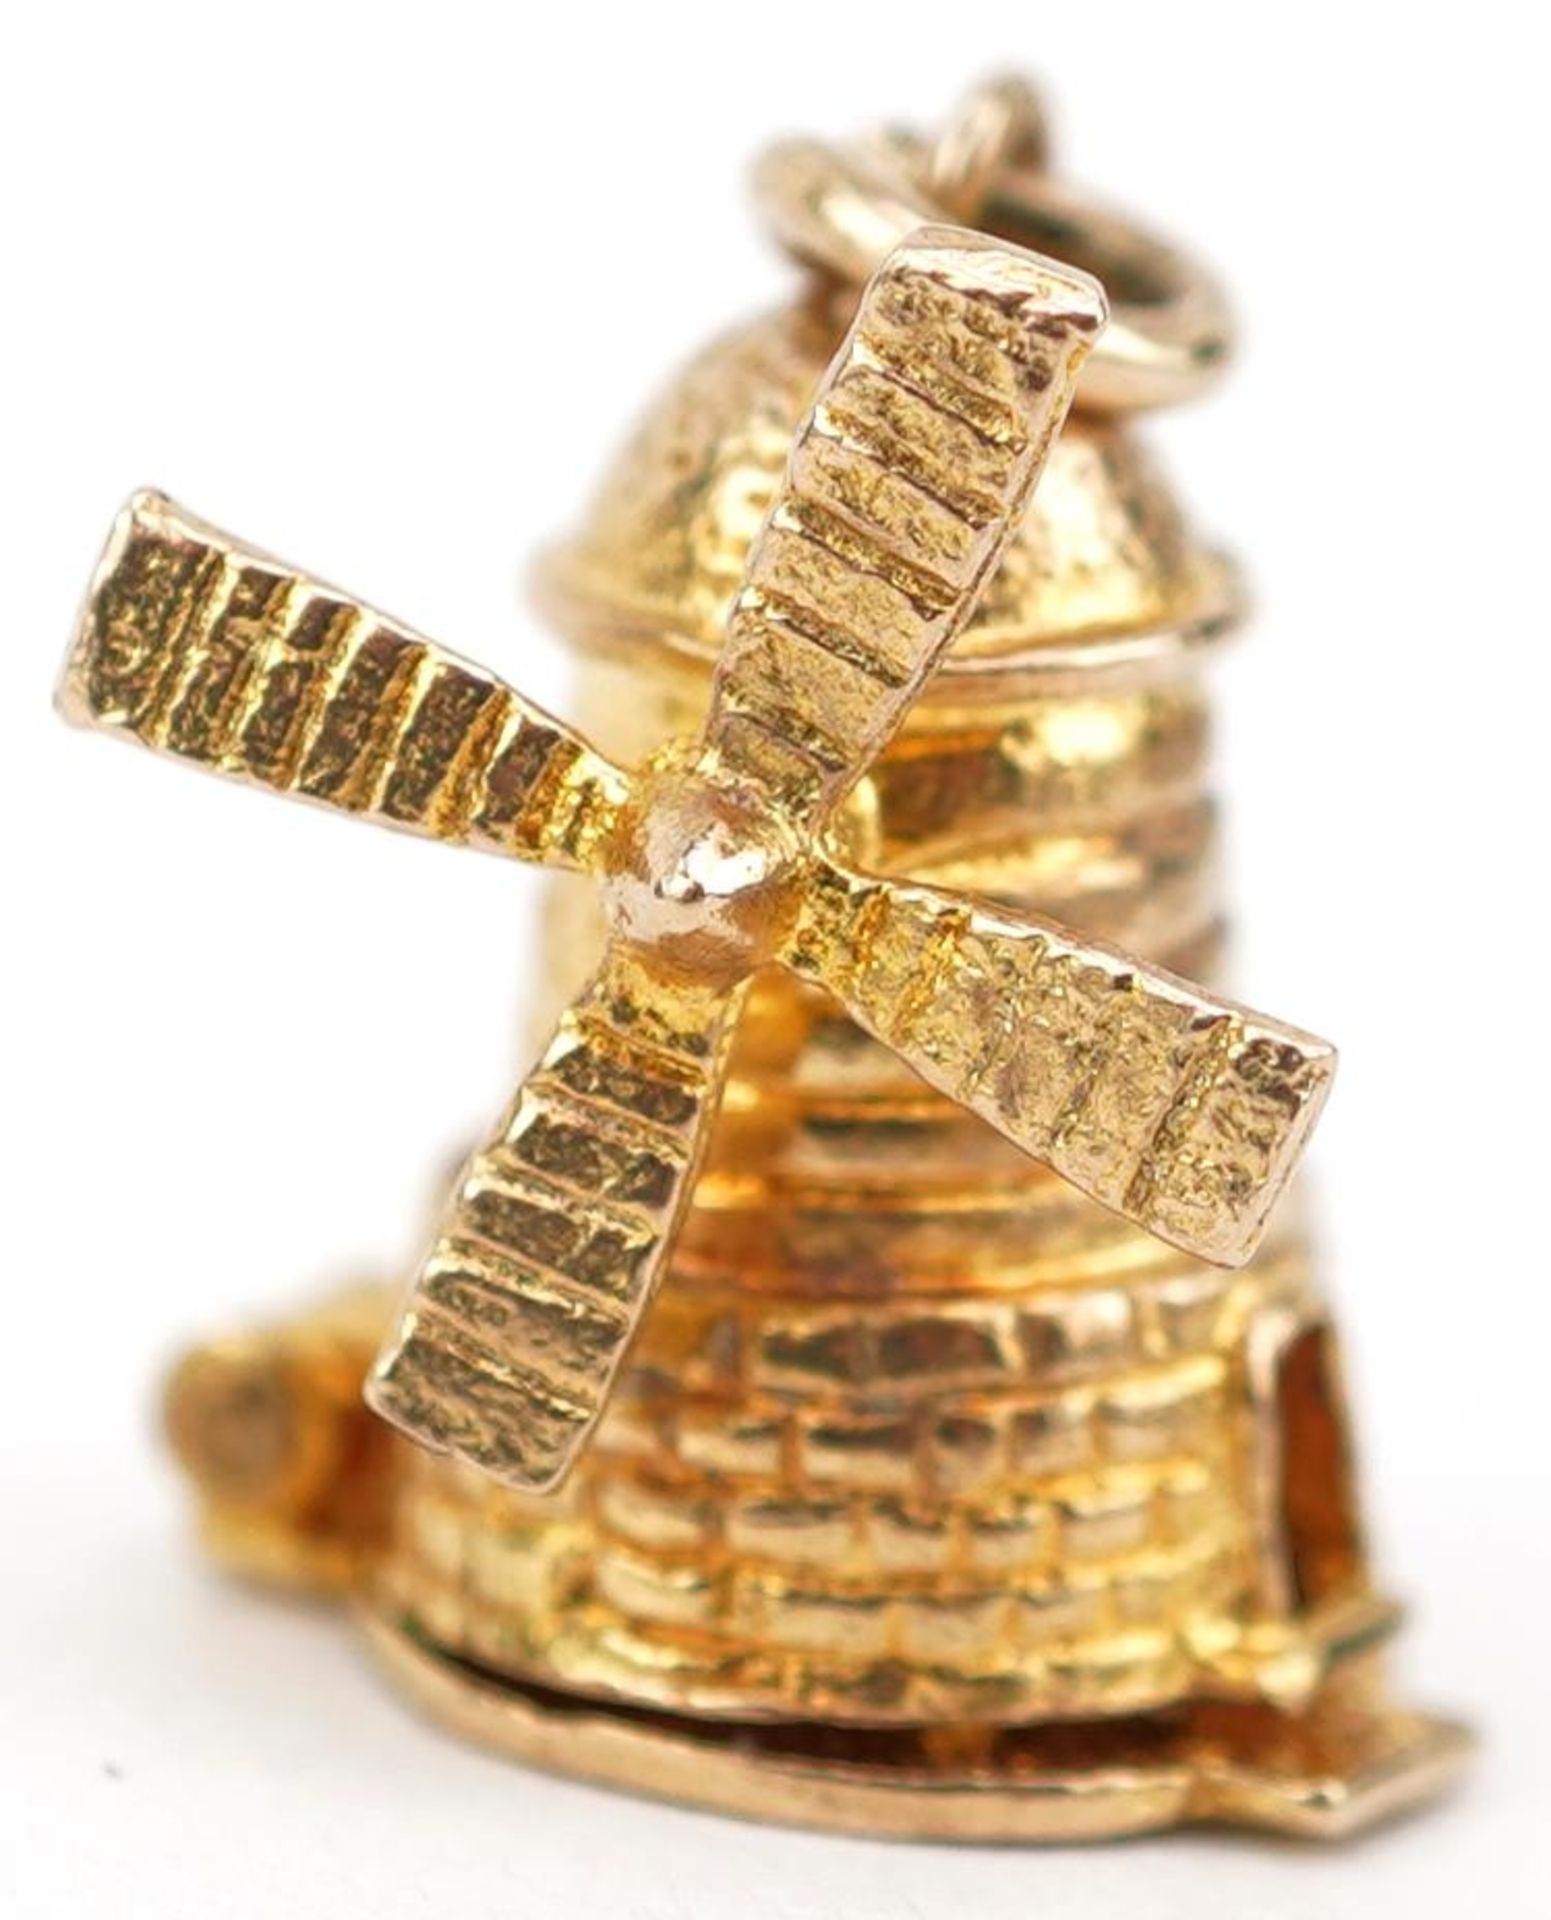 9ct gold opening windmill charm, 1.4cm high, 2.7g : For further information on this lot please visit